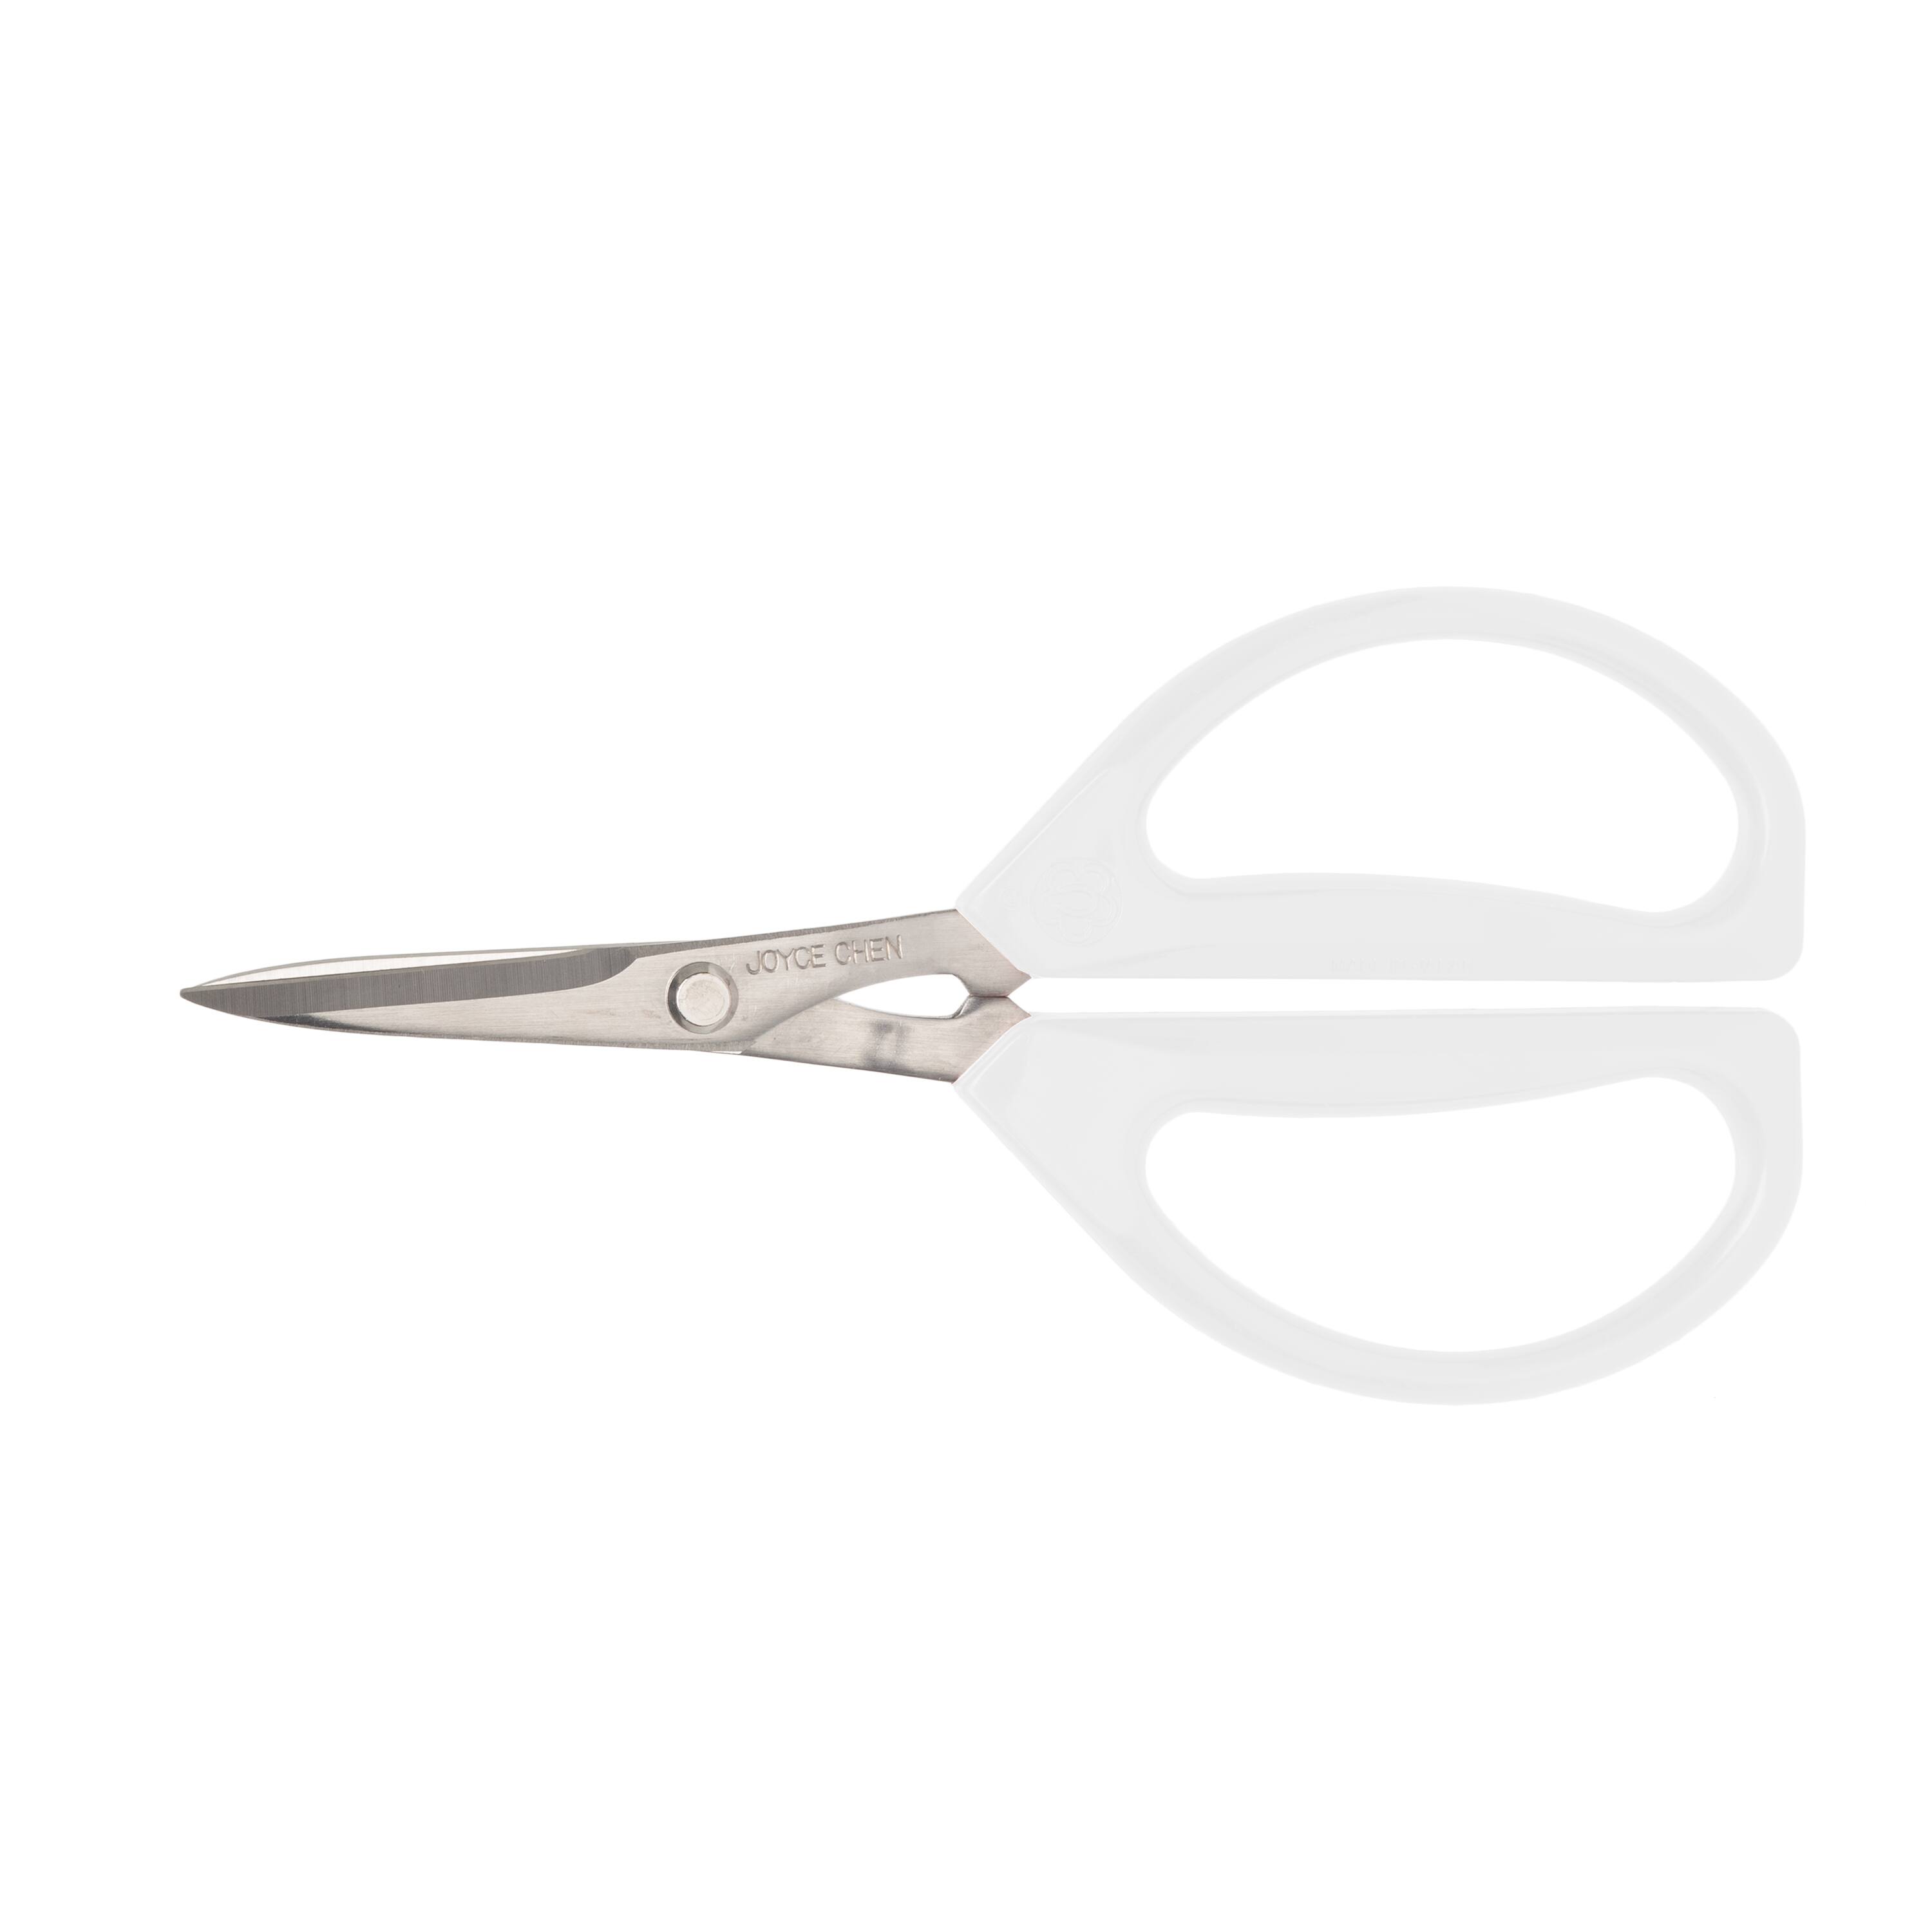 2-Pack Joyce Chen Original Unlimited Kitchen Scissors with Red Handles